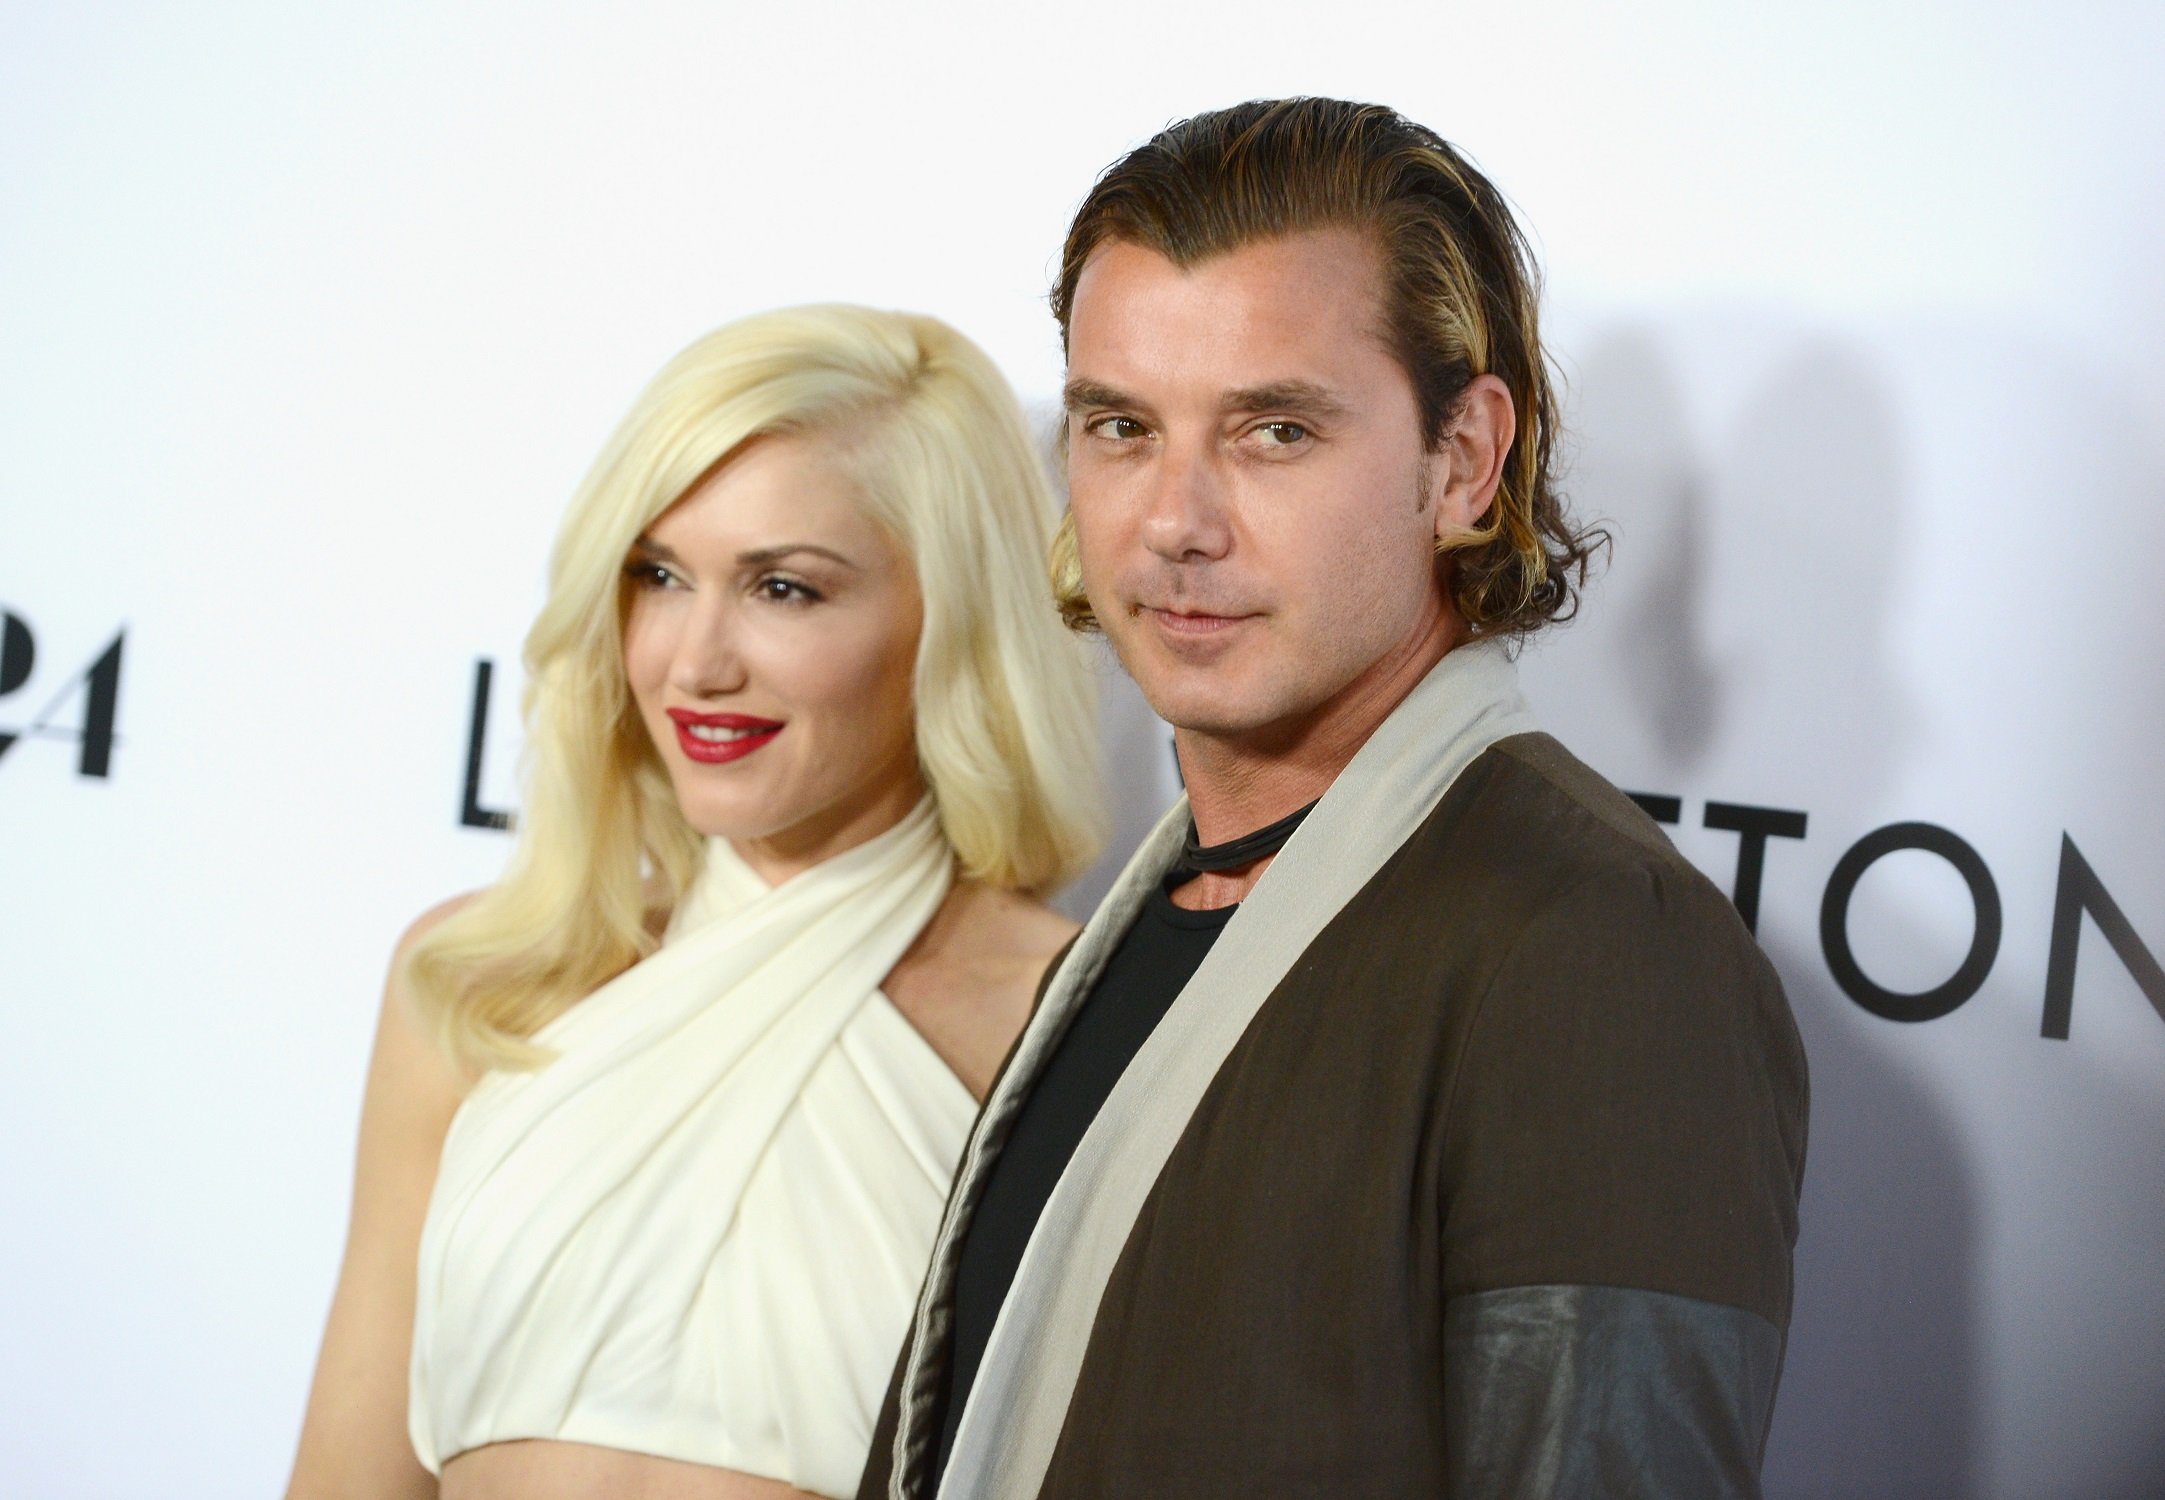 Gwen Stefani and Gavin Rossdale attend the premiere of 'The Bling Ring' in 2013